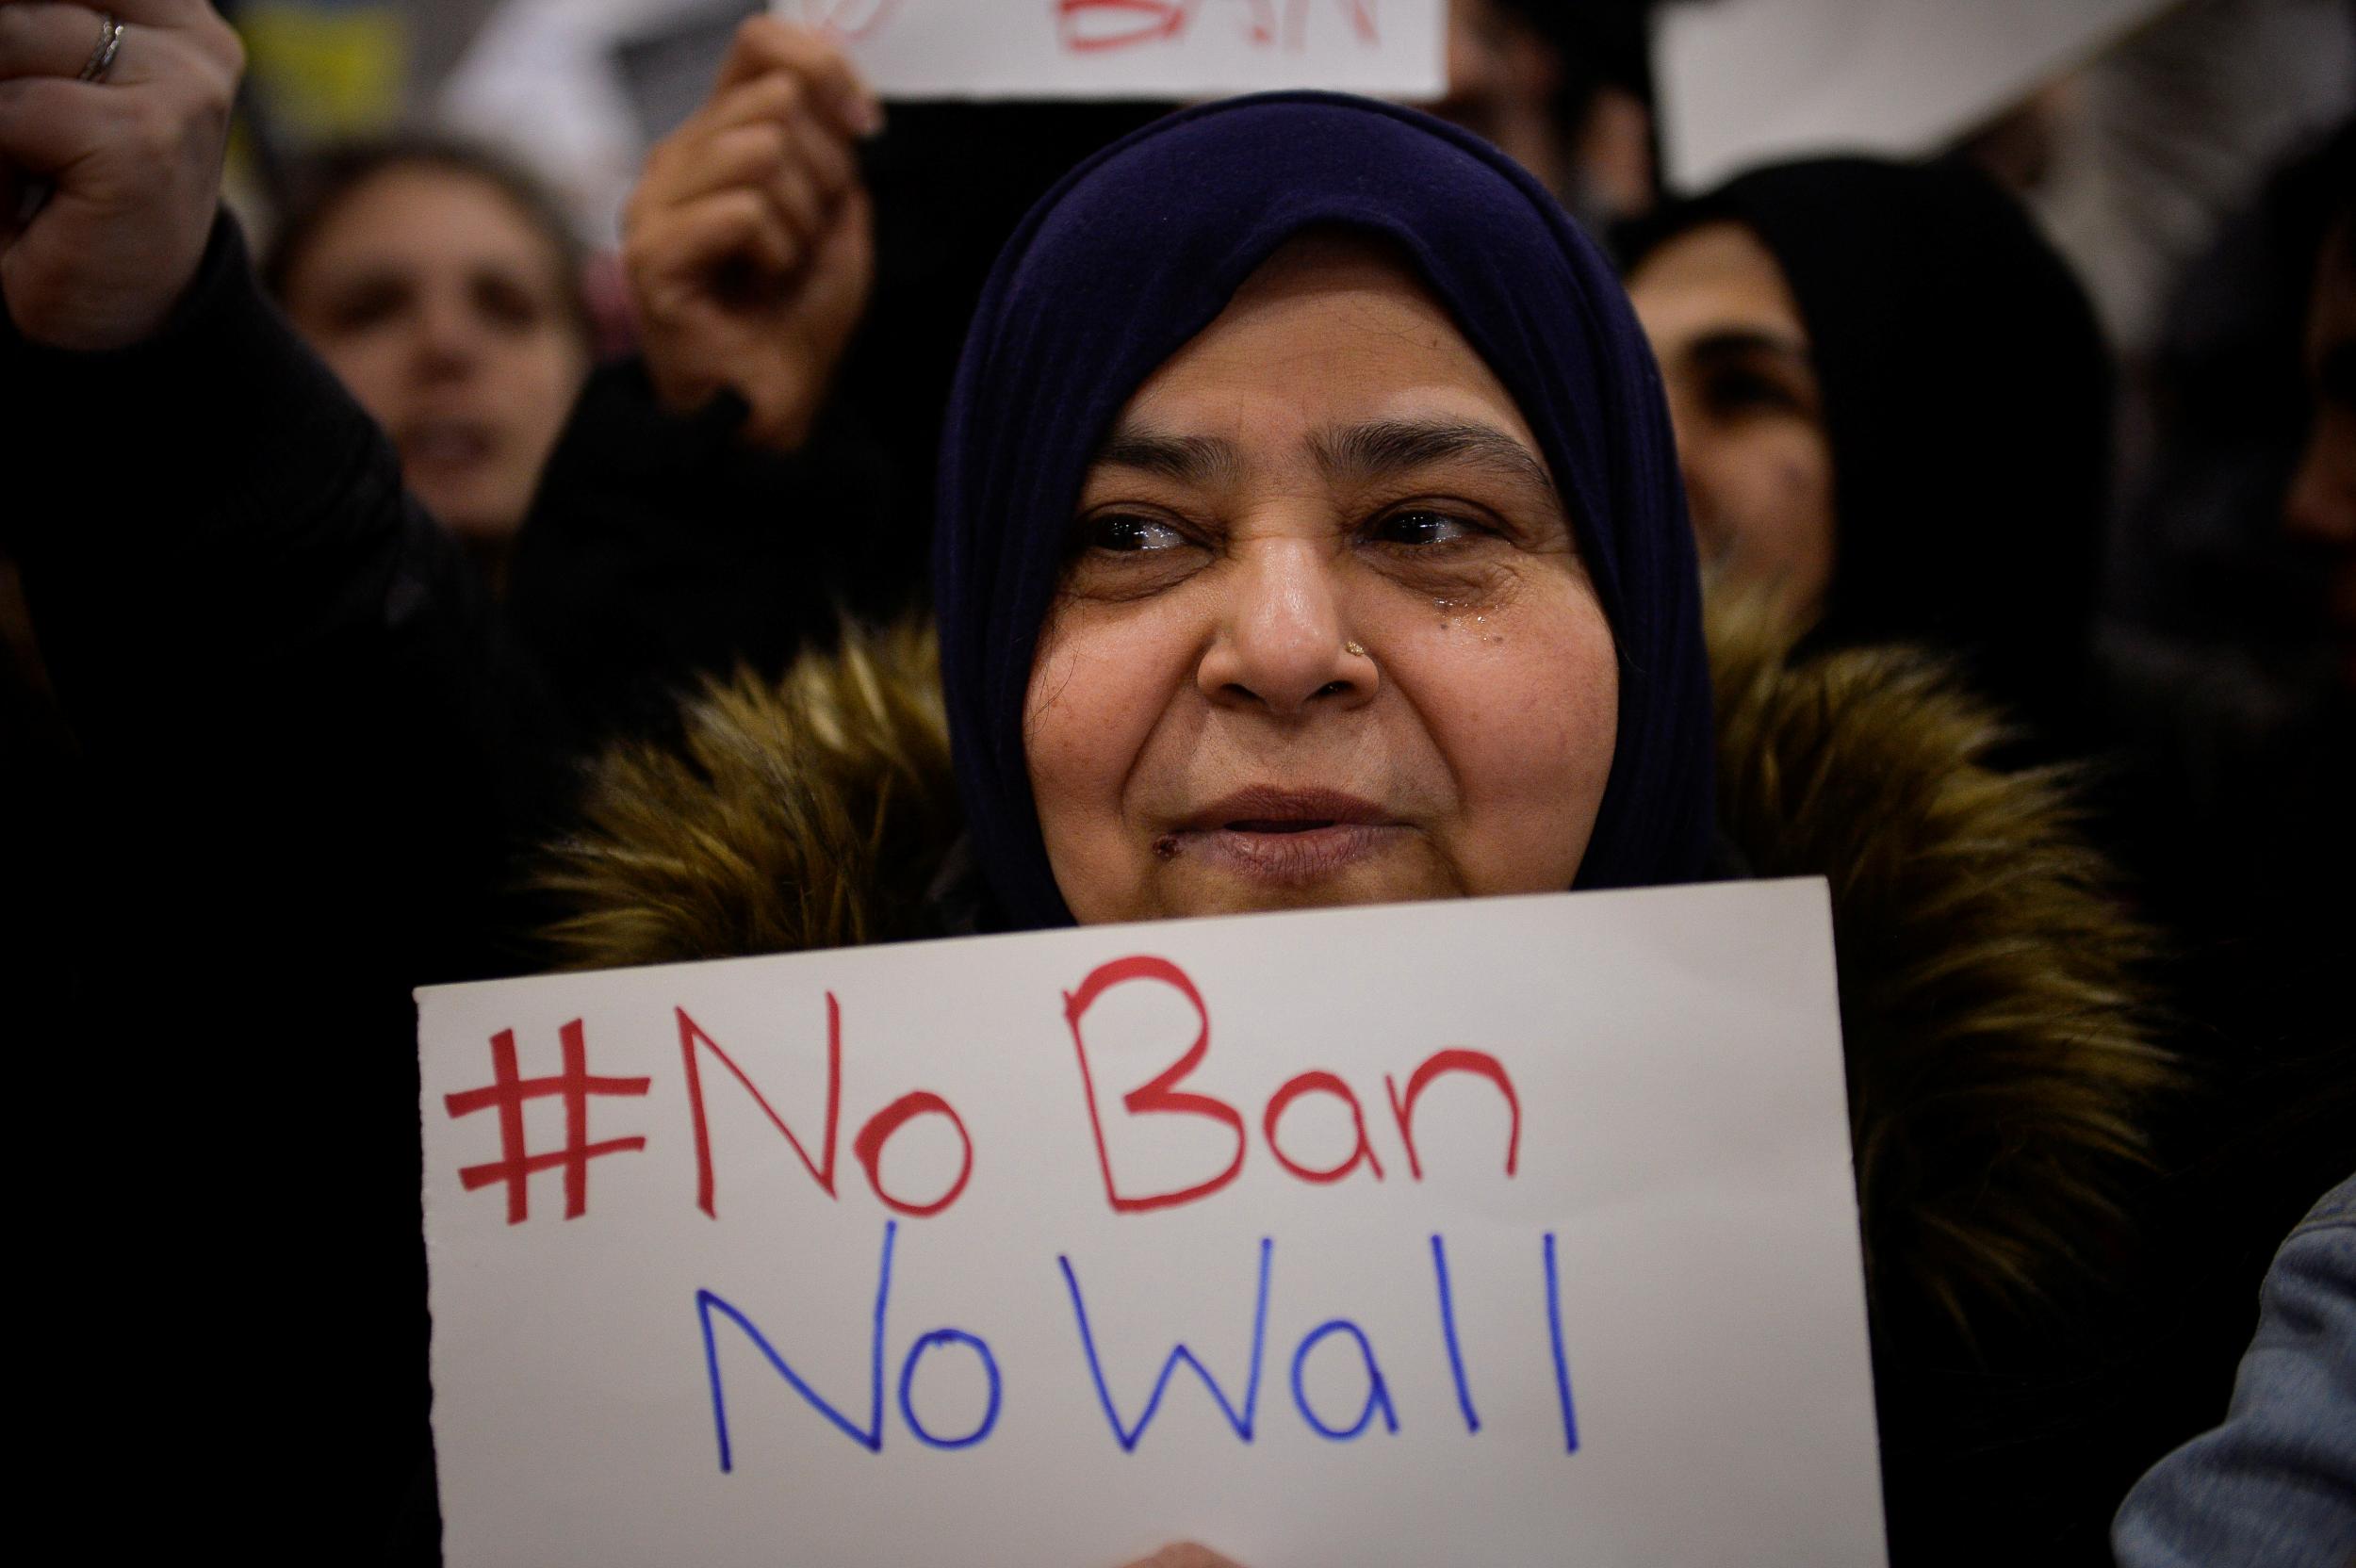 Protesters at Philadelphia International airport on Sunday. Thousands flocked to airports across the US at the weekend to oppose the travel ban